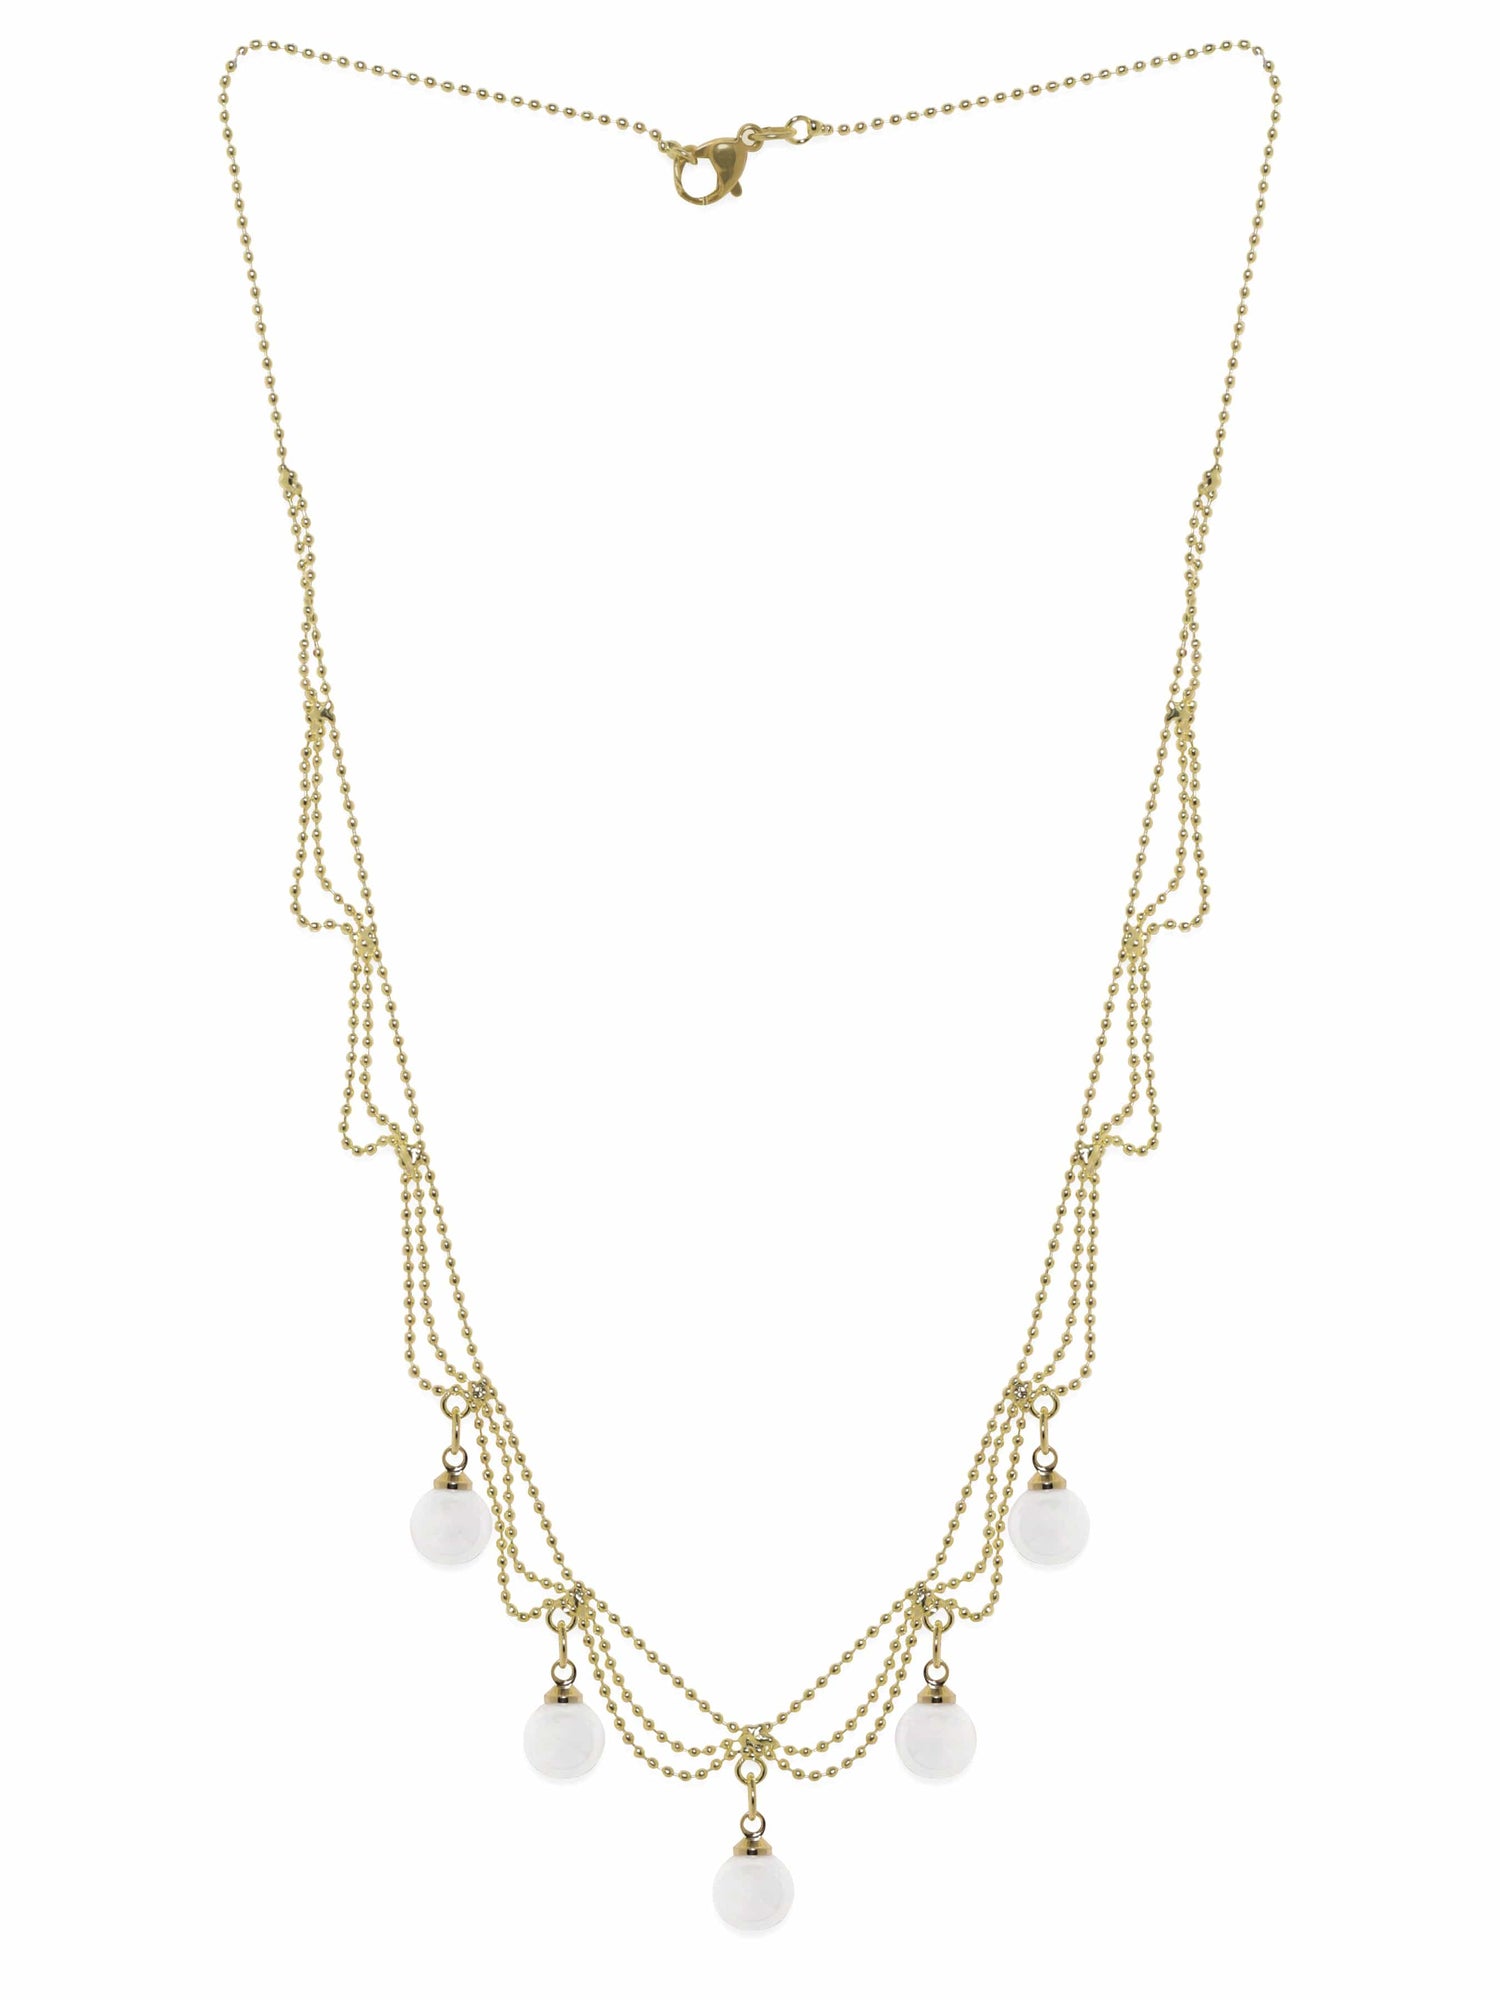 Rubans Voguish 18K Gold Plated Layered Chain With Bead Dangle Necklace.  Necklace